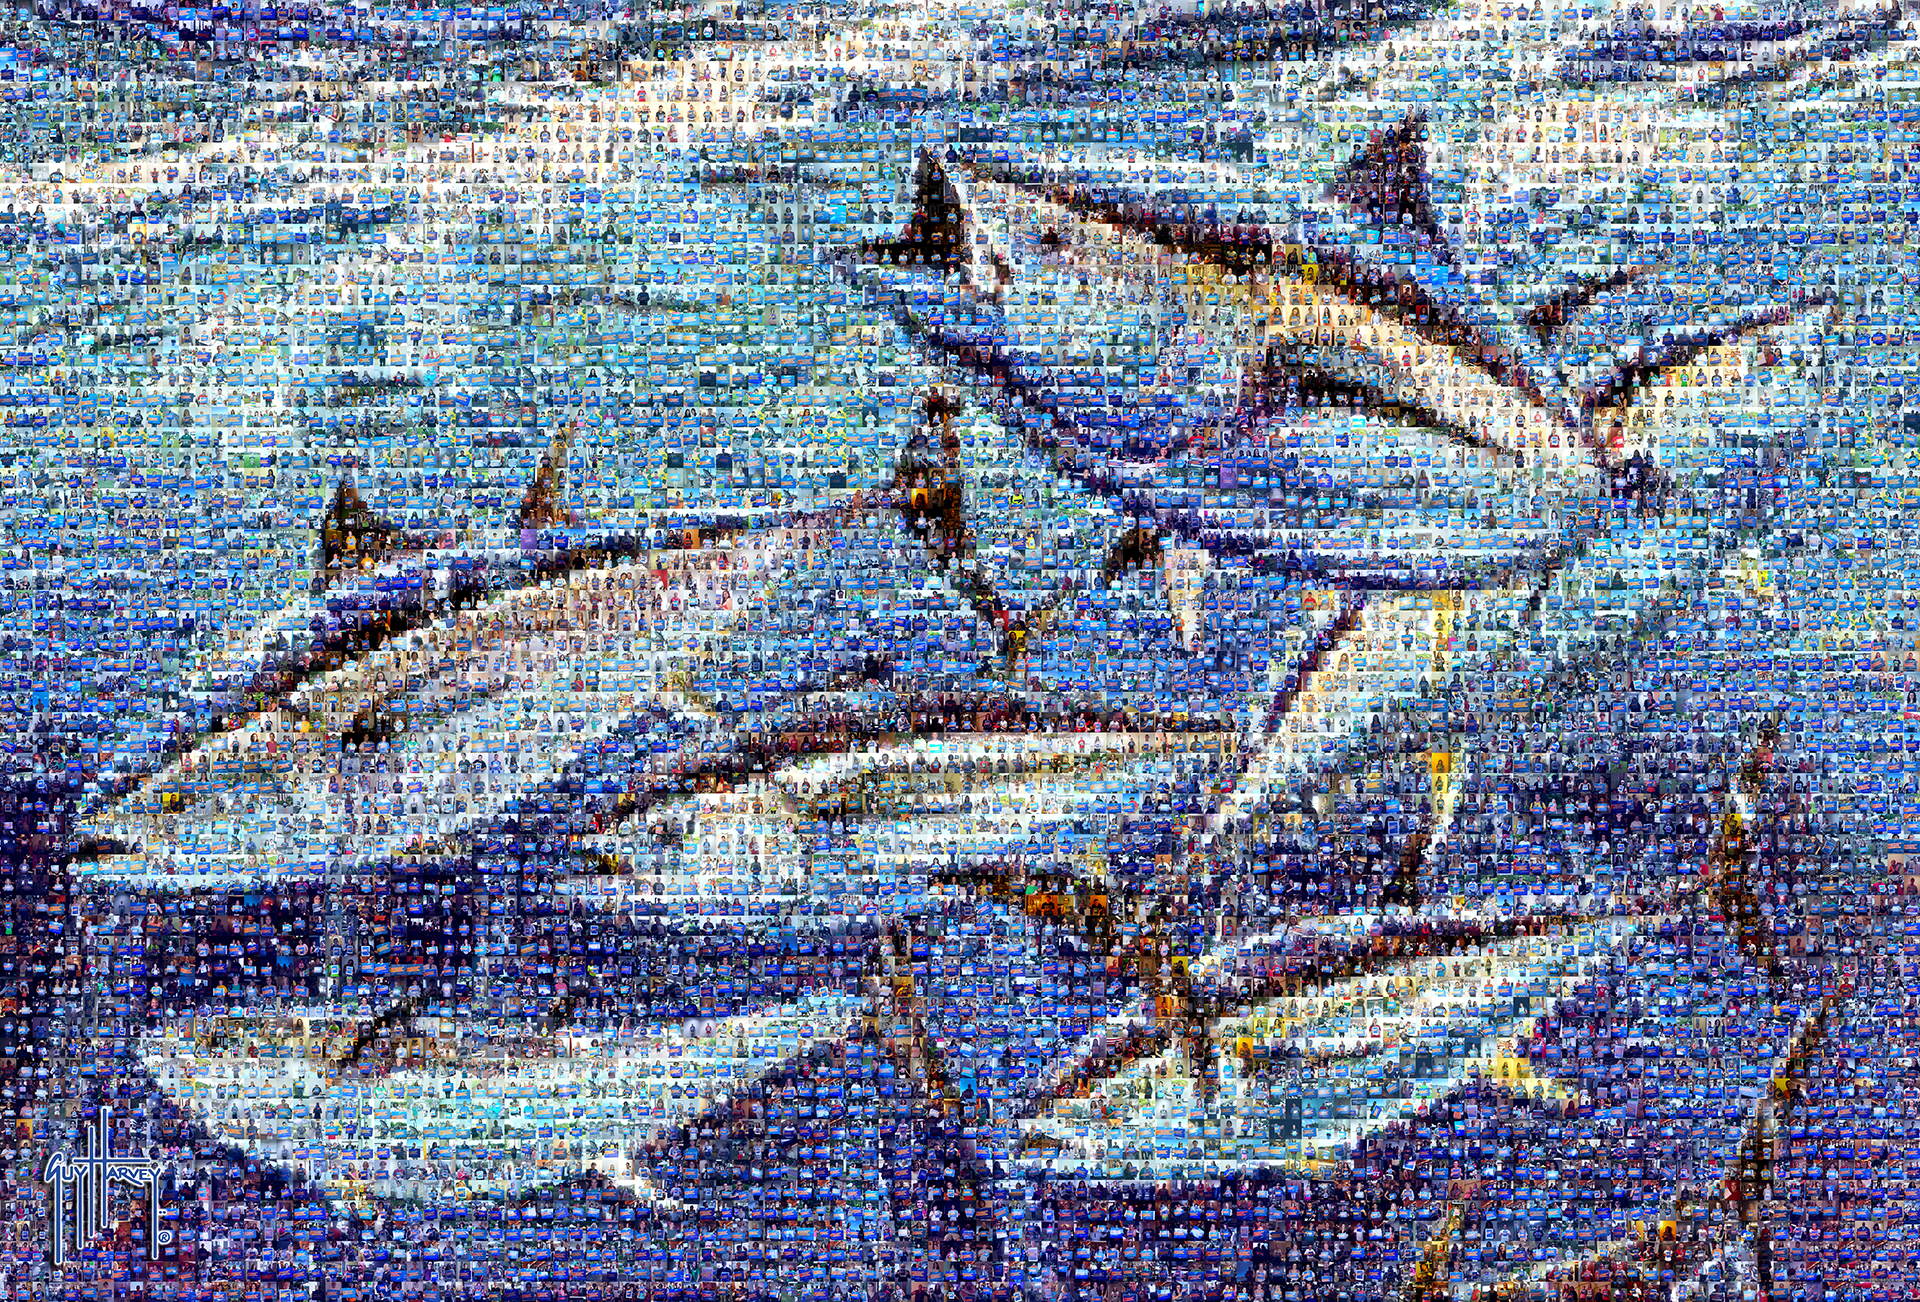 photo mosaic created using over 7,000 images of Bluefin supporters